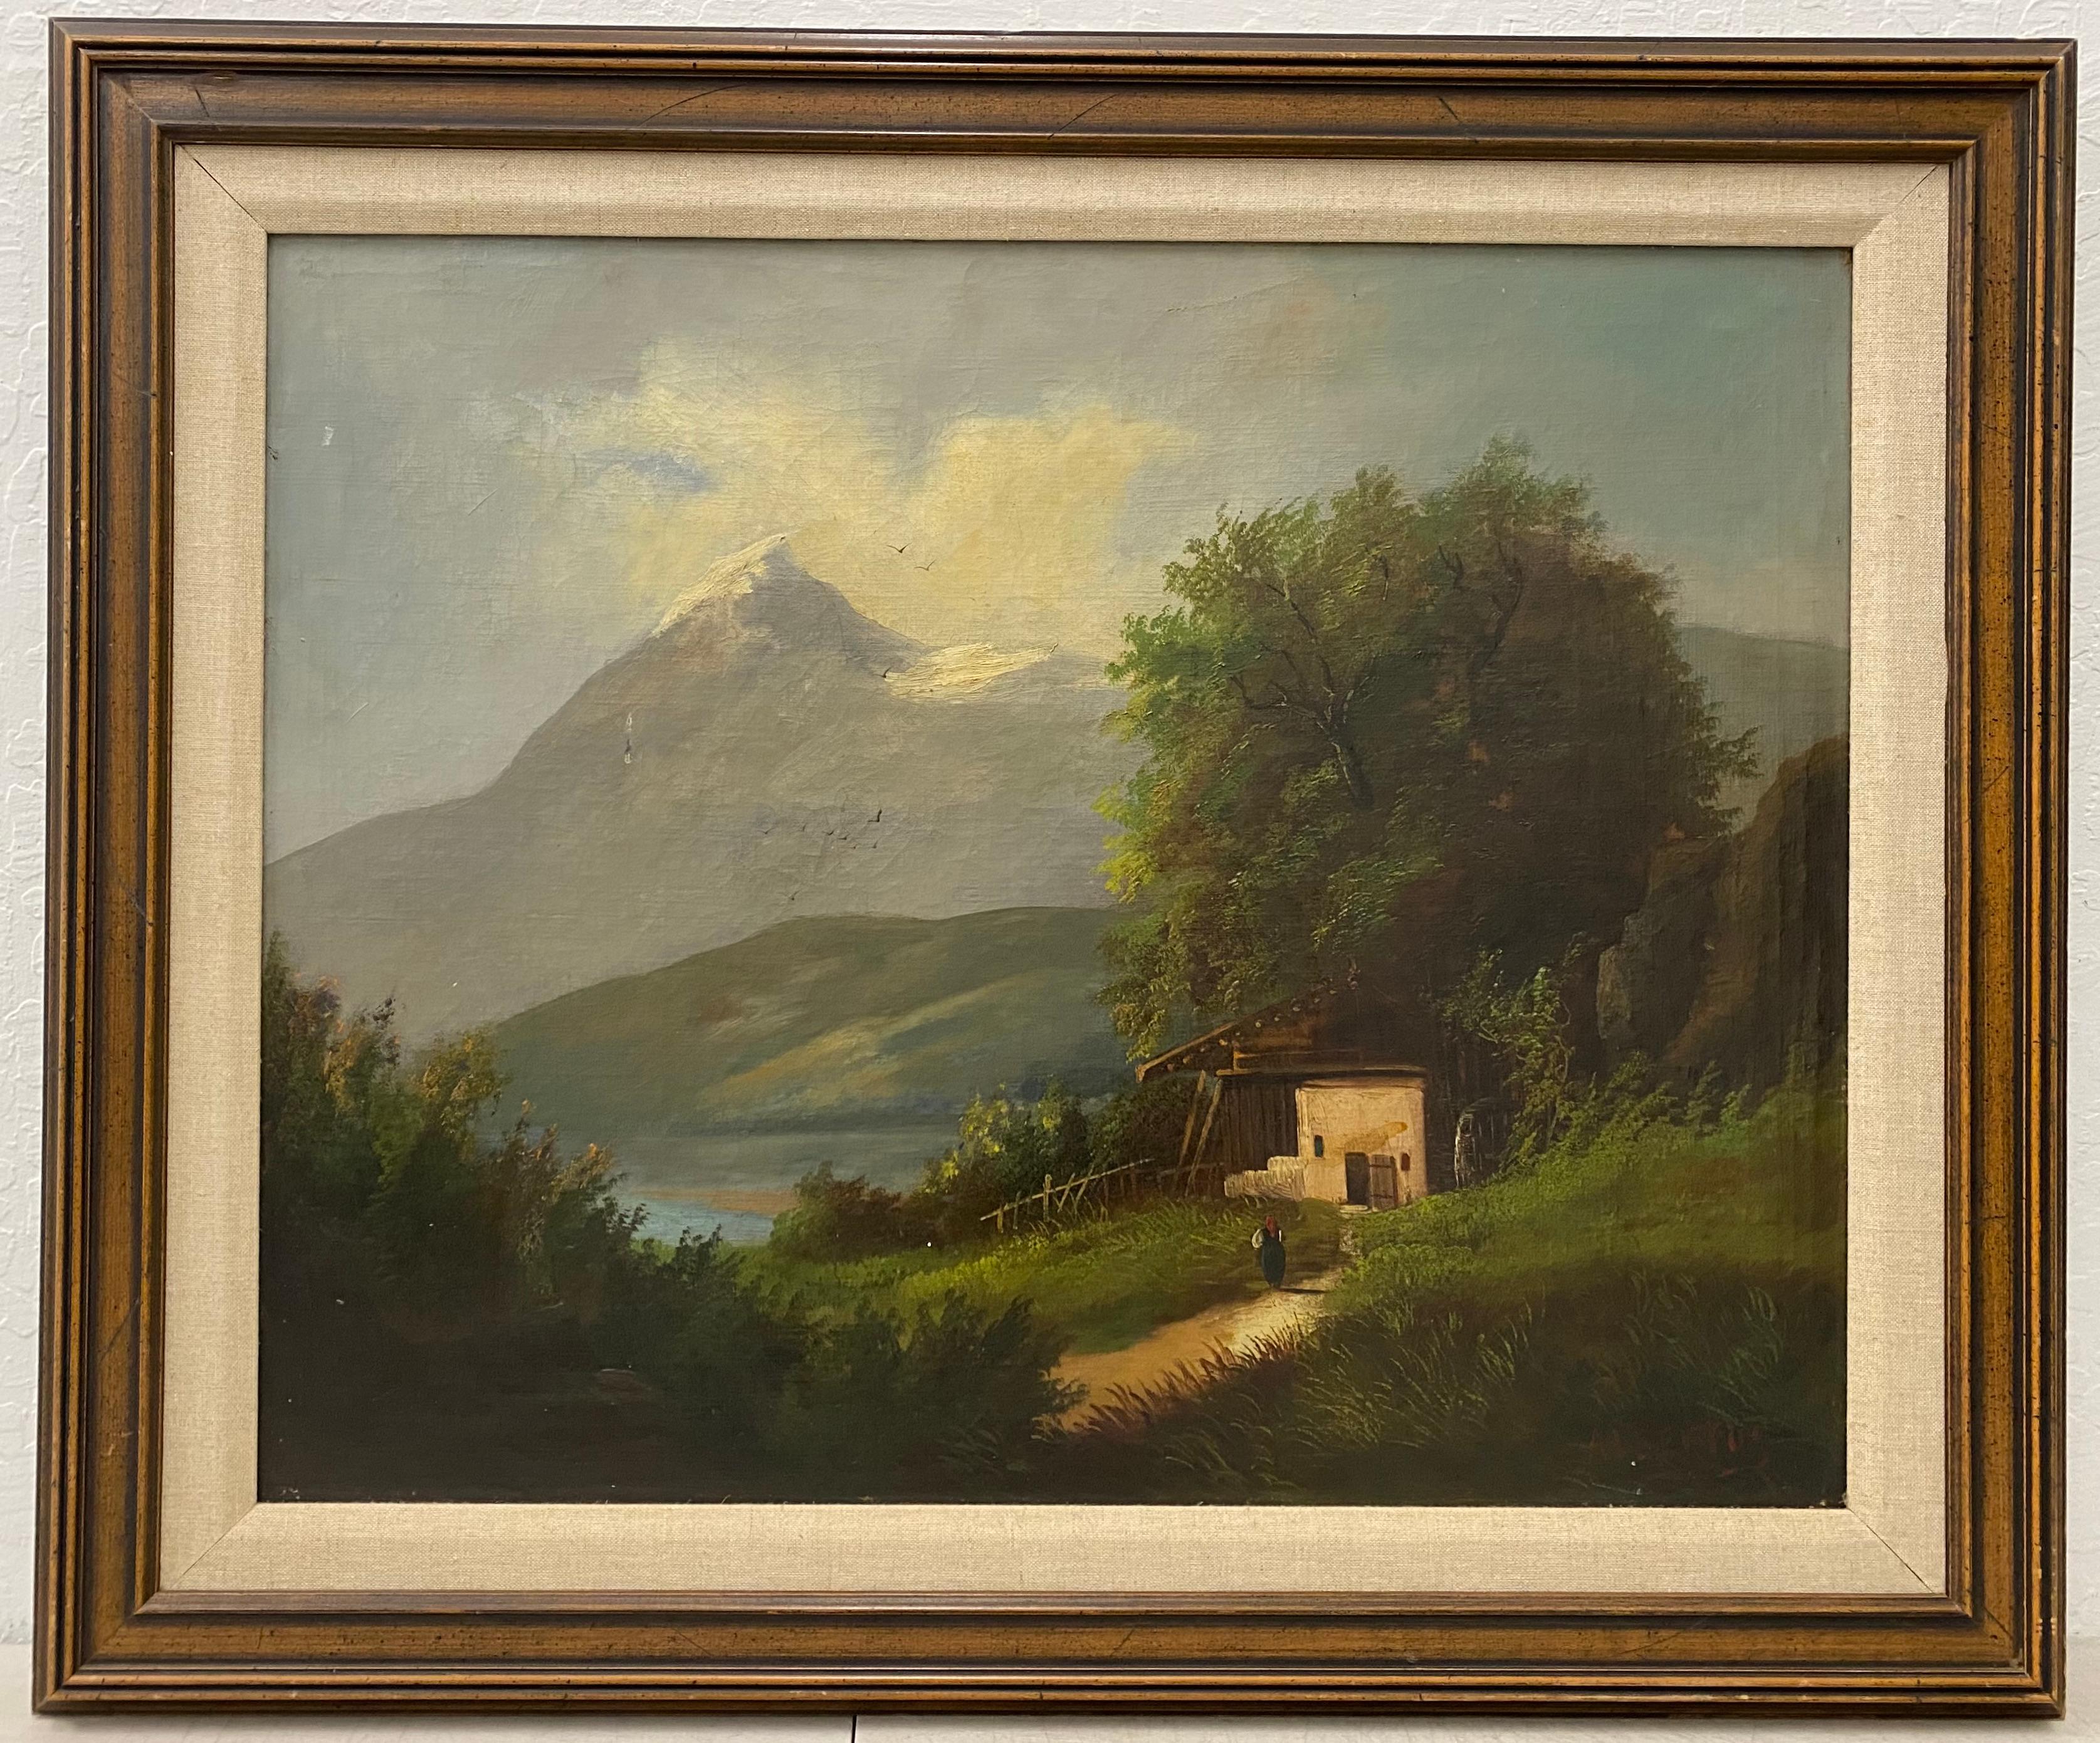 Unknown Landscape Painting - Mountain Home Landscape Original Painting by Albertos C.1920